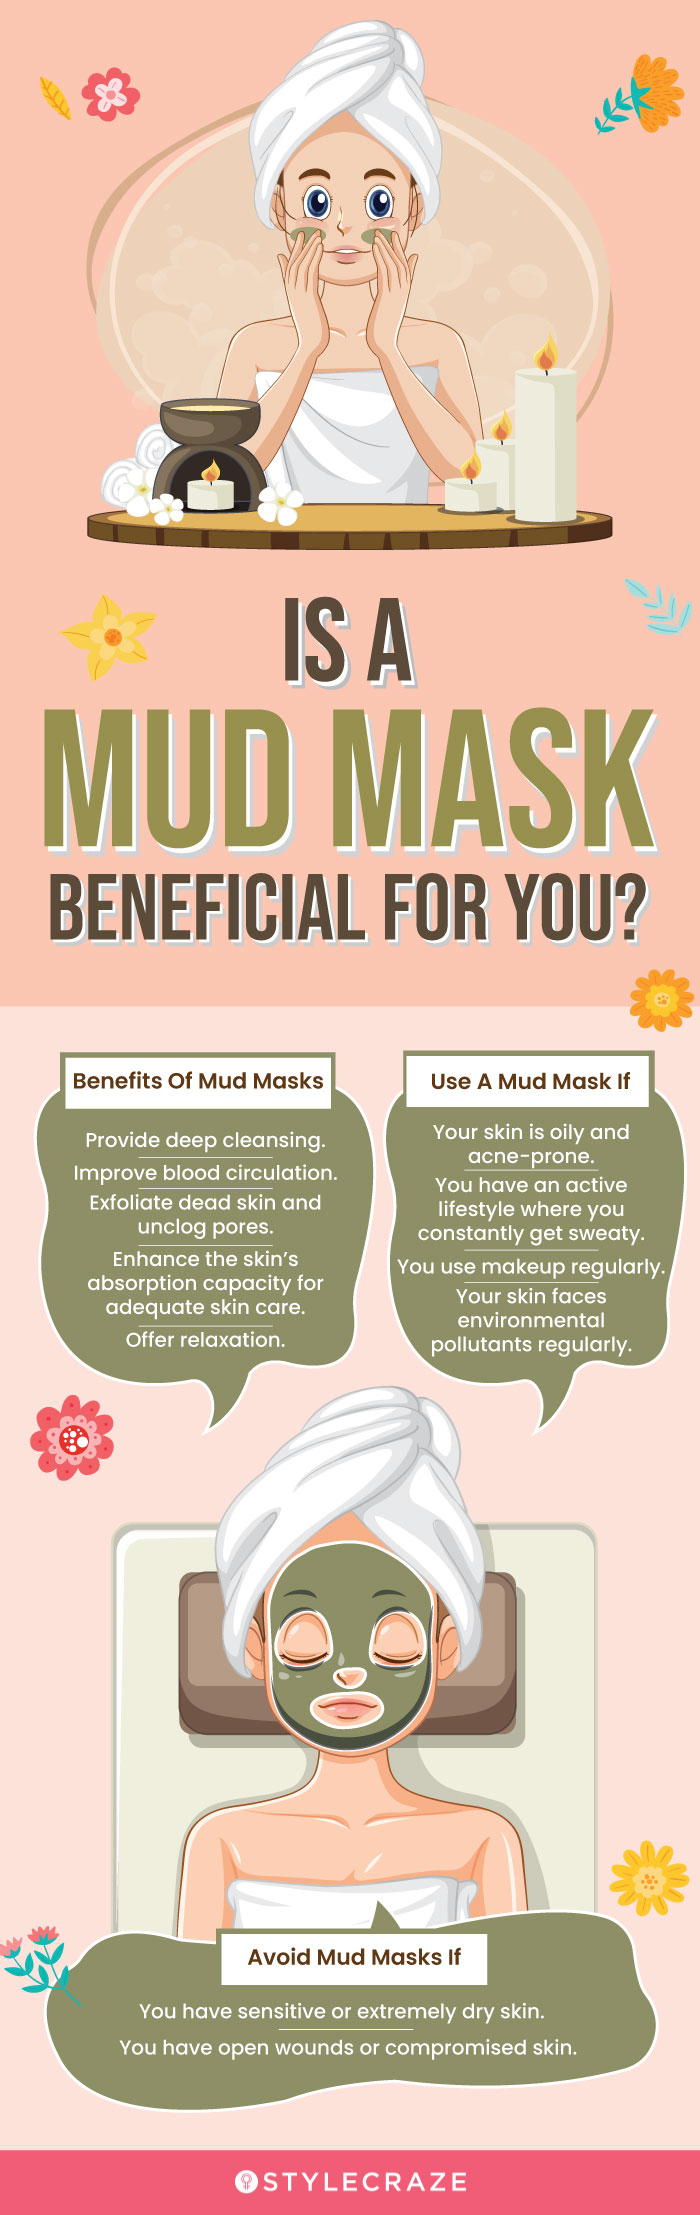 Is A Mud Mask Beneficial For You? (infographic)